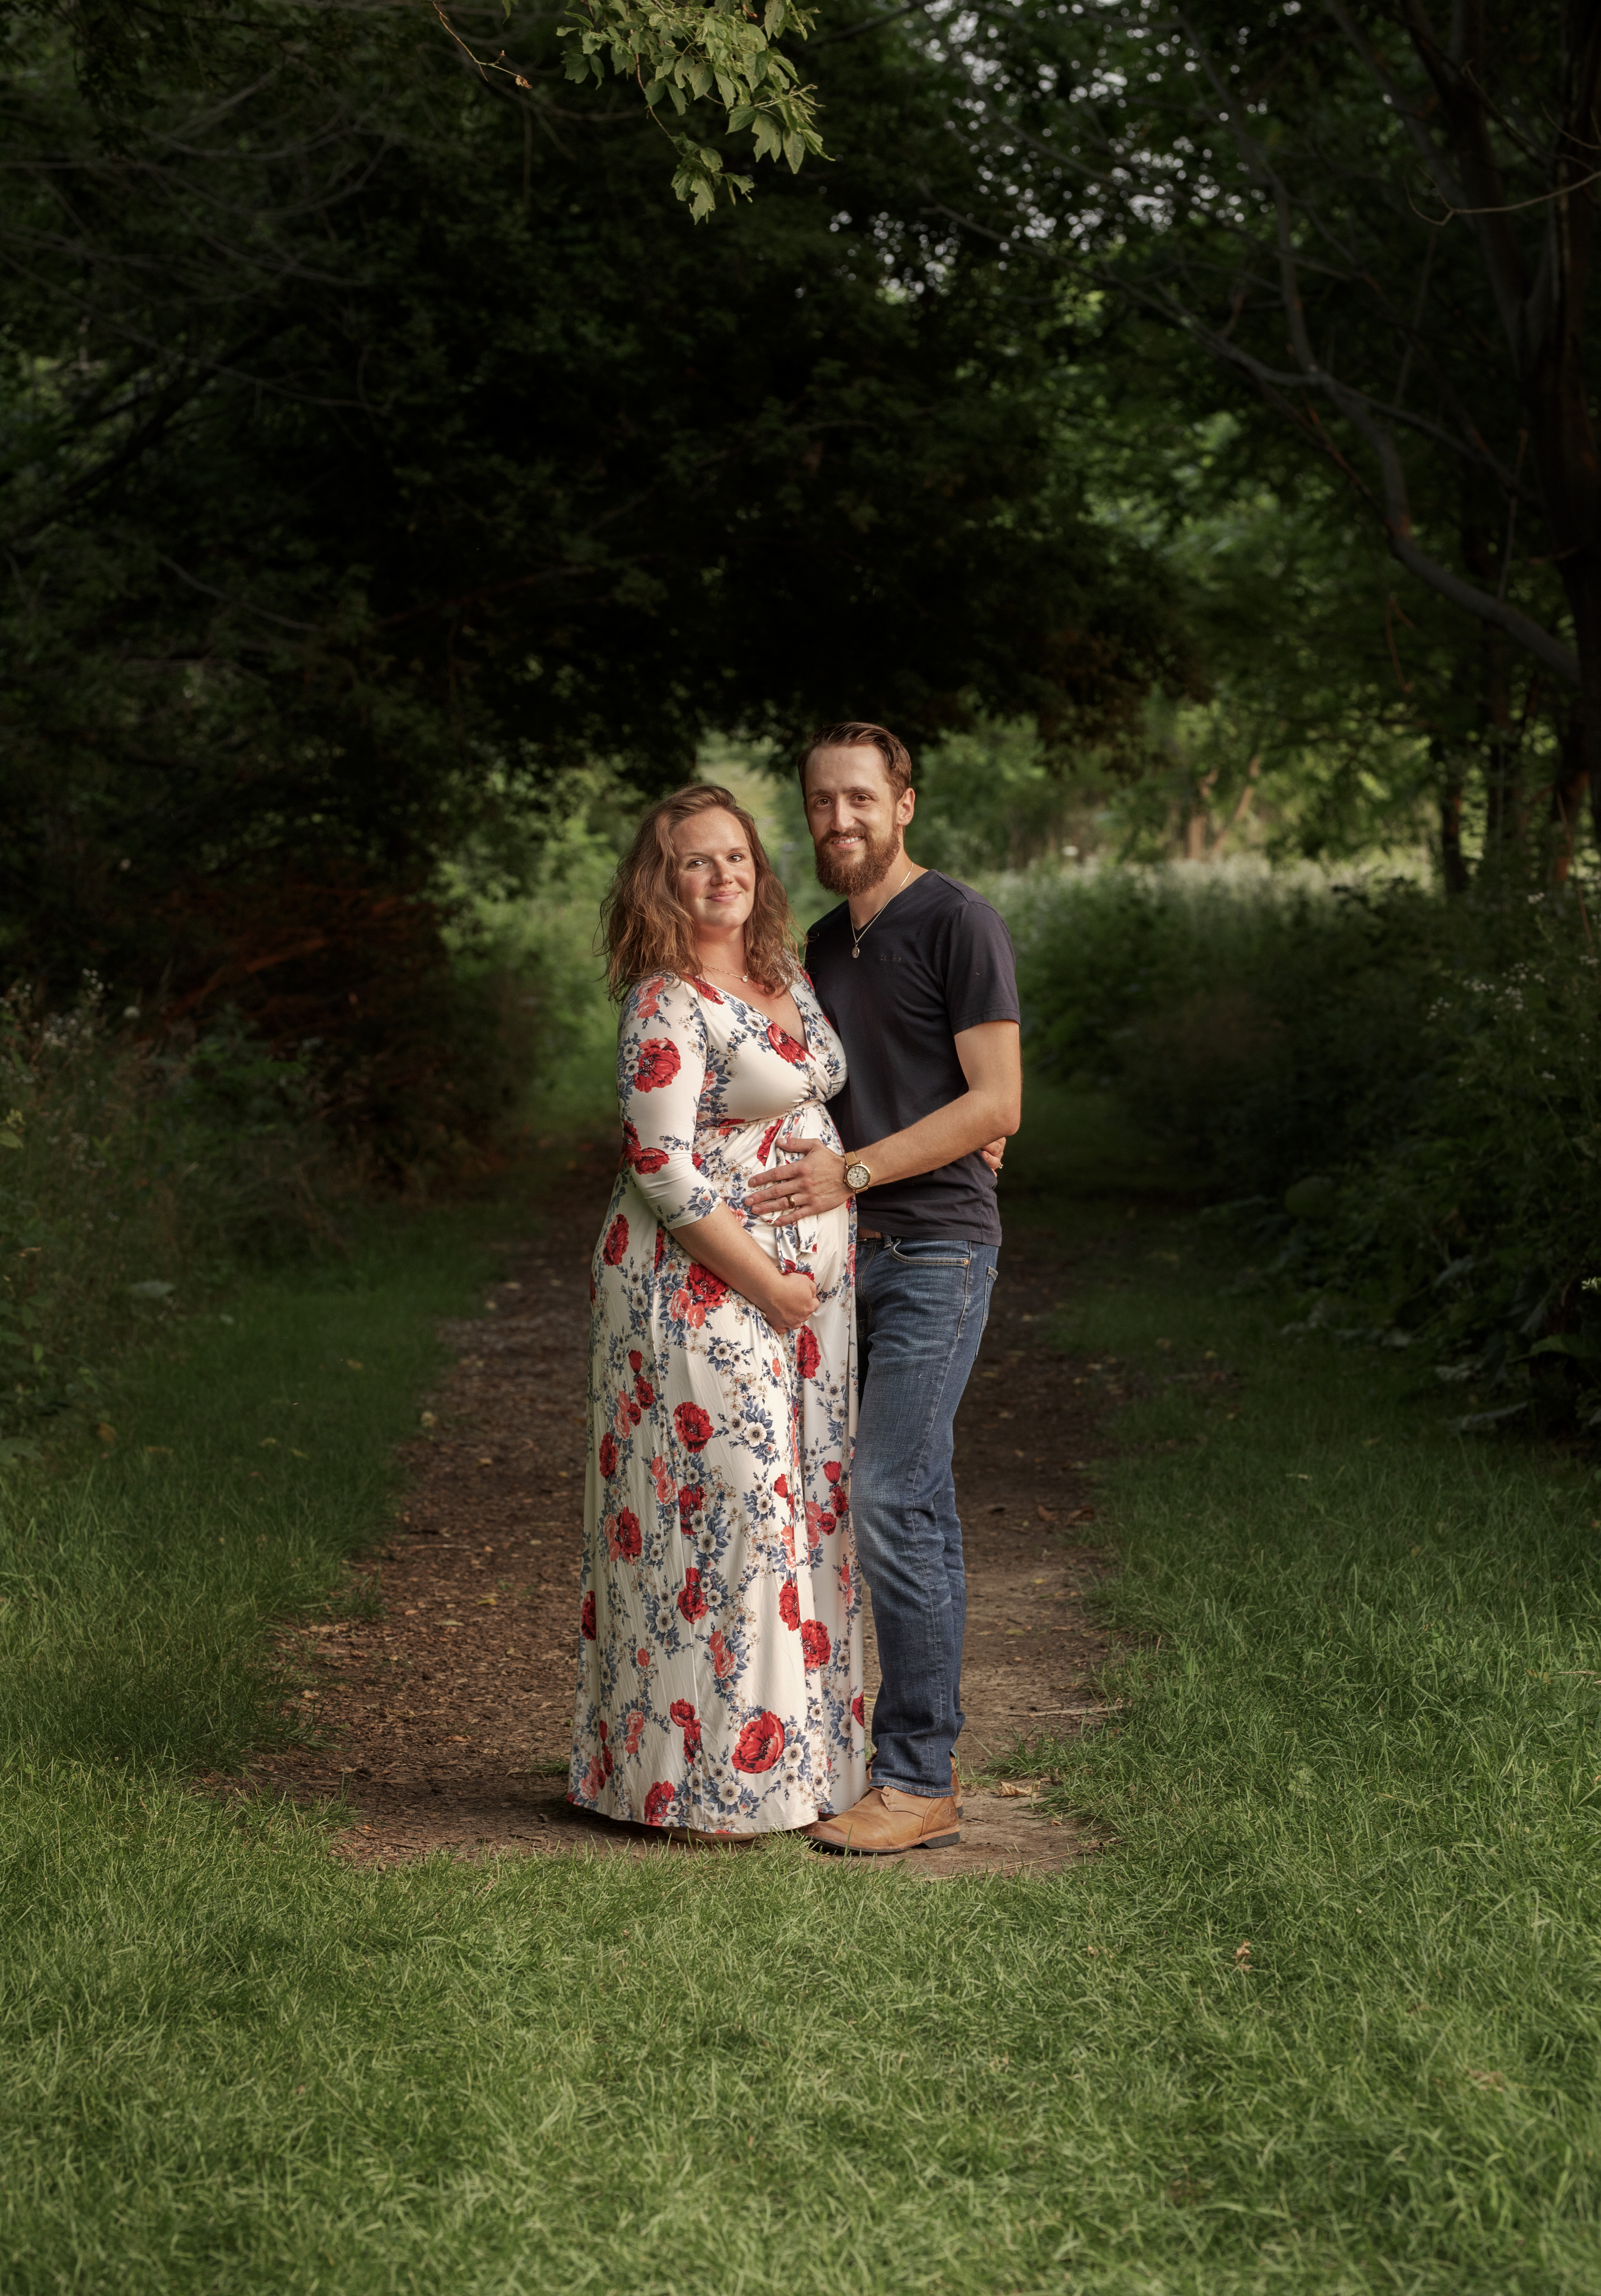 grand rapids maternity photo shoot women in red dress outdoors